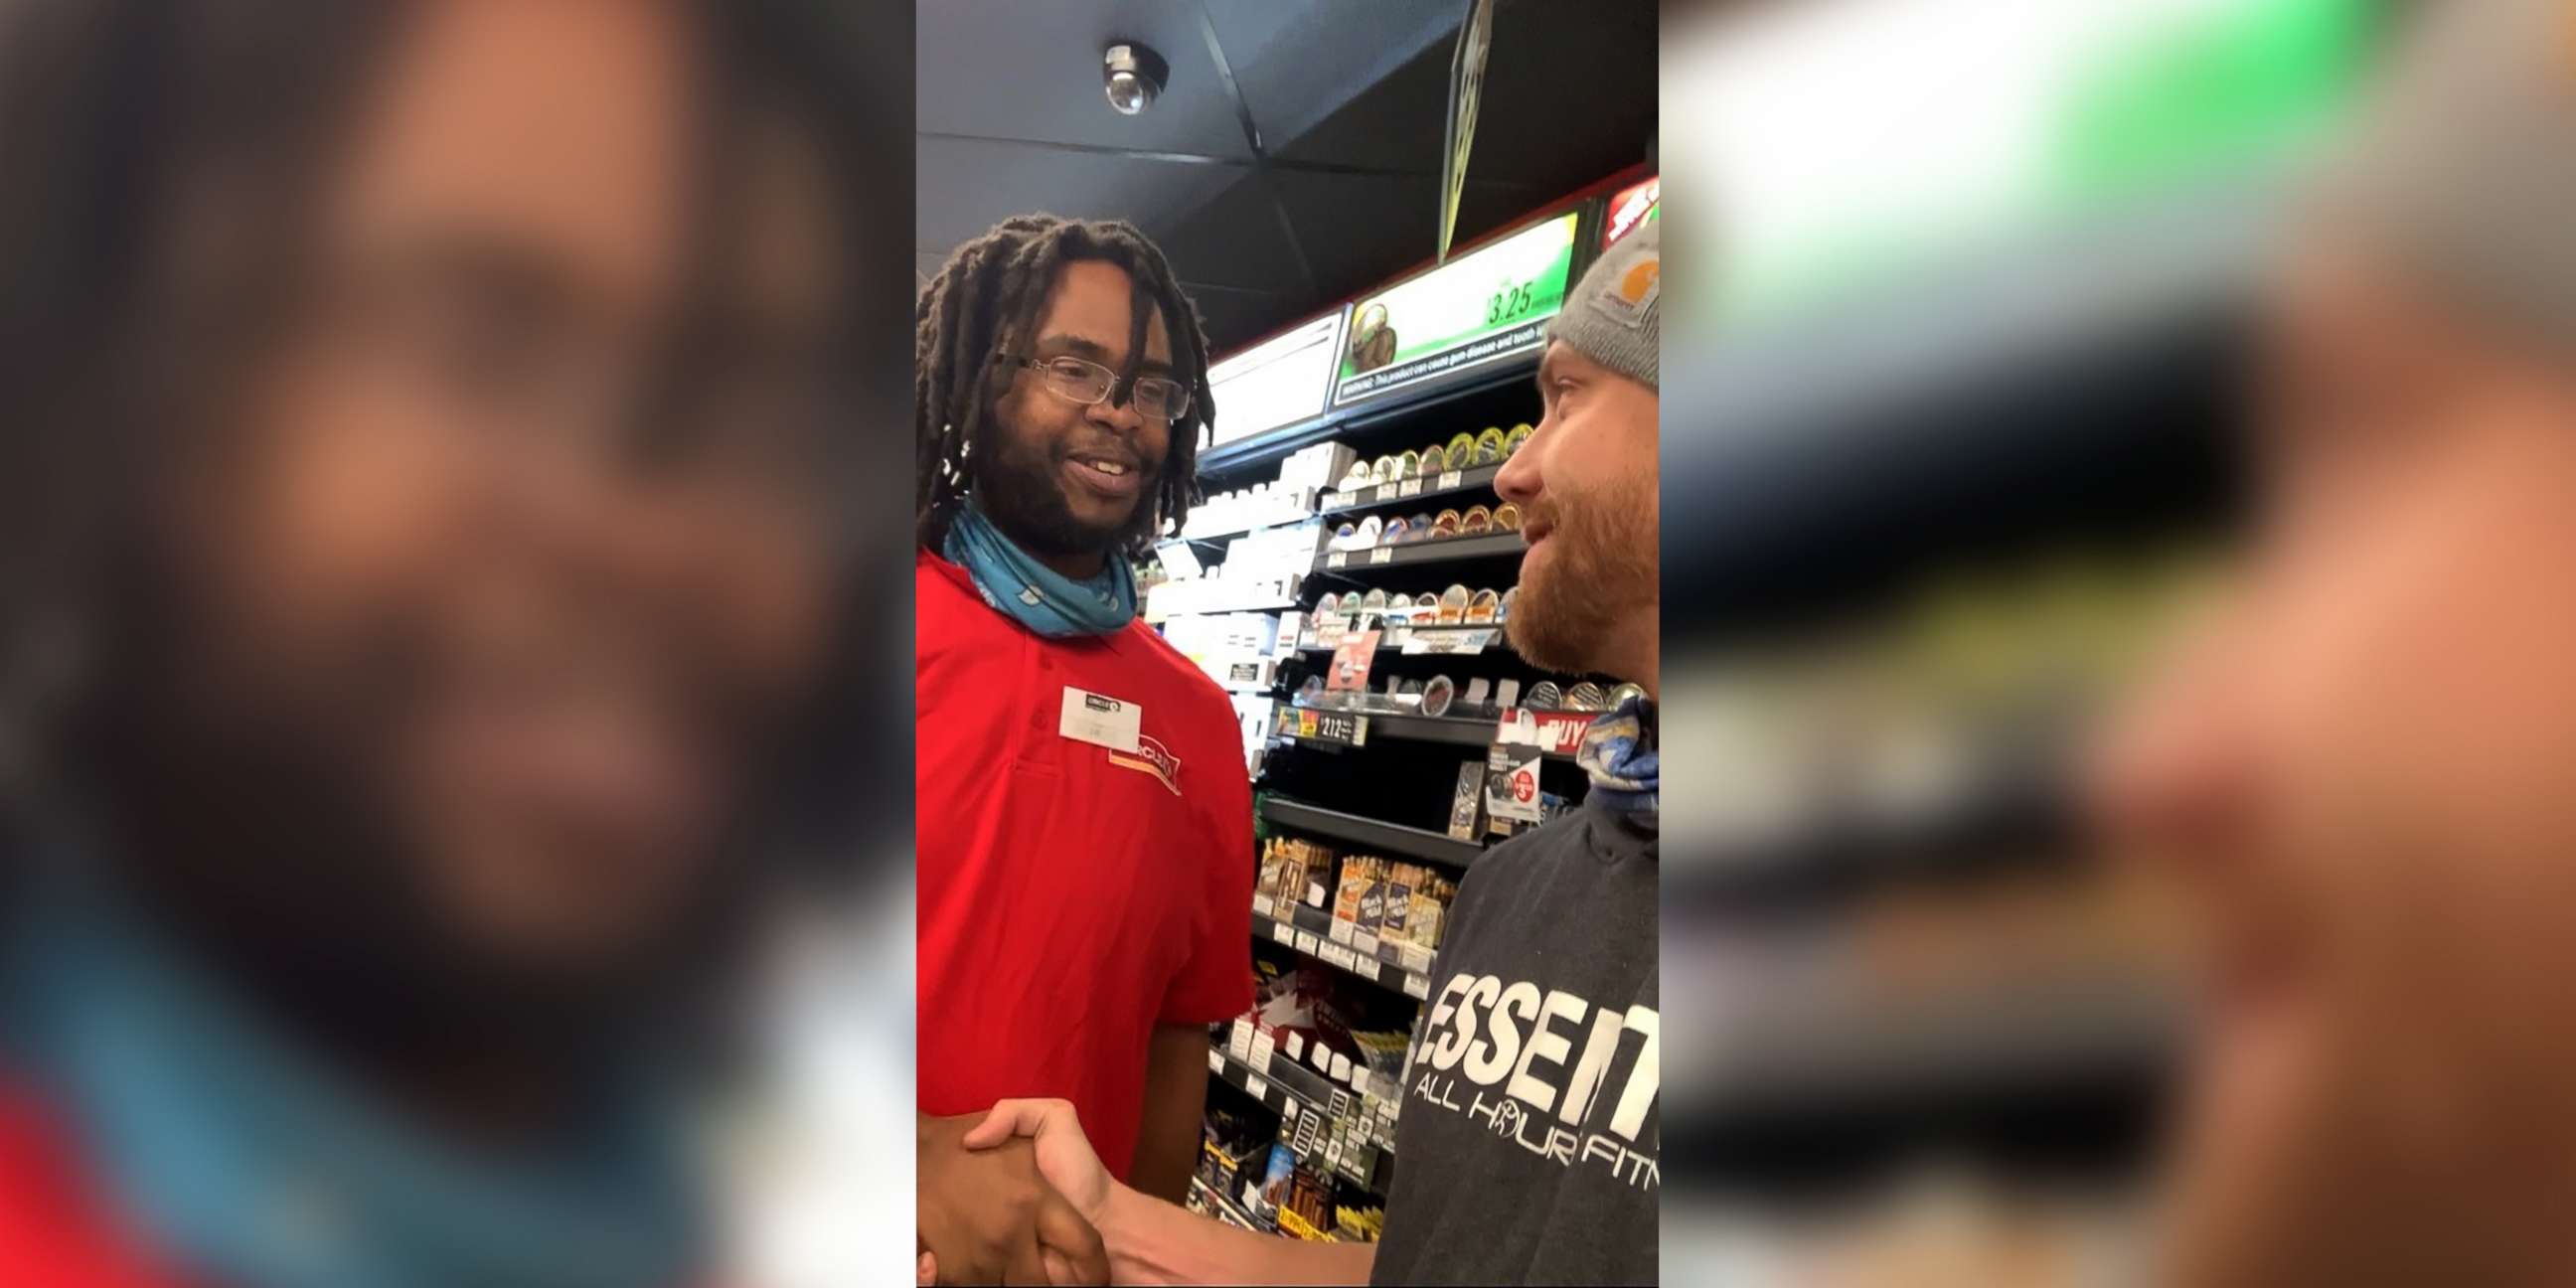 PHOTO: Gas station cashier Edward Hays Jr., 28, left, shakes the hand of David Daniels, 29, right, the man who crowdfunded thousands of dollars so Hays could have his own car to drive to his job, in Bossier City, Louisiana.